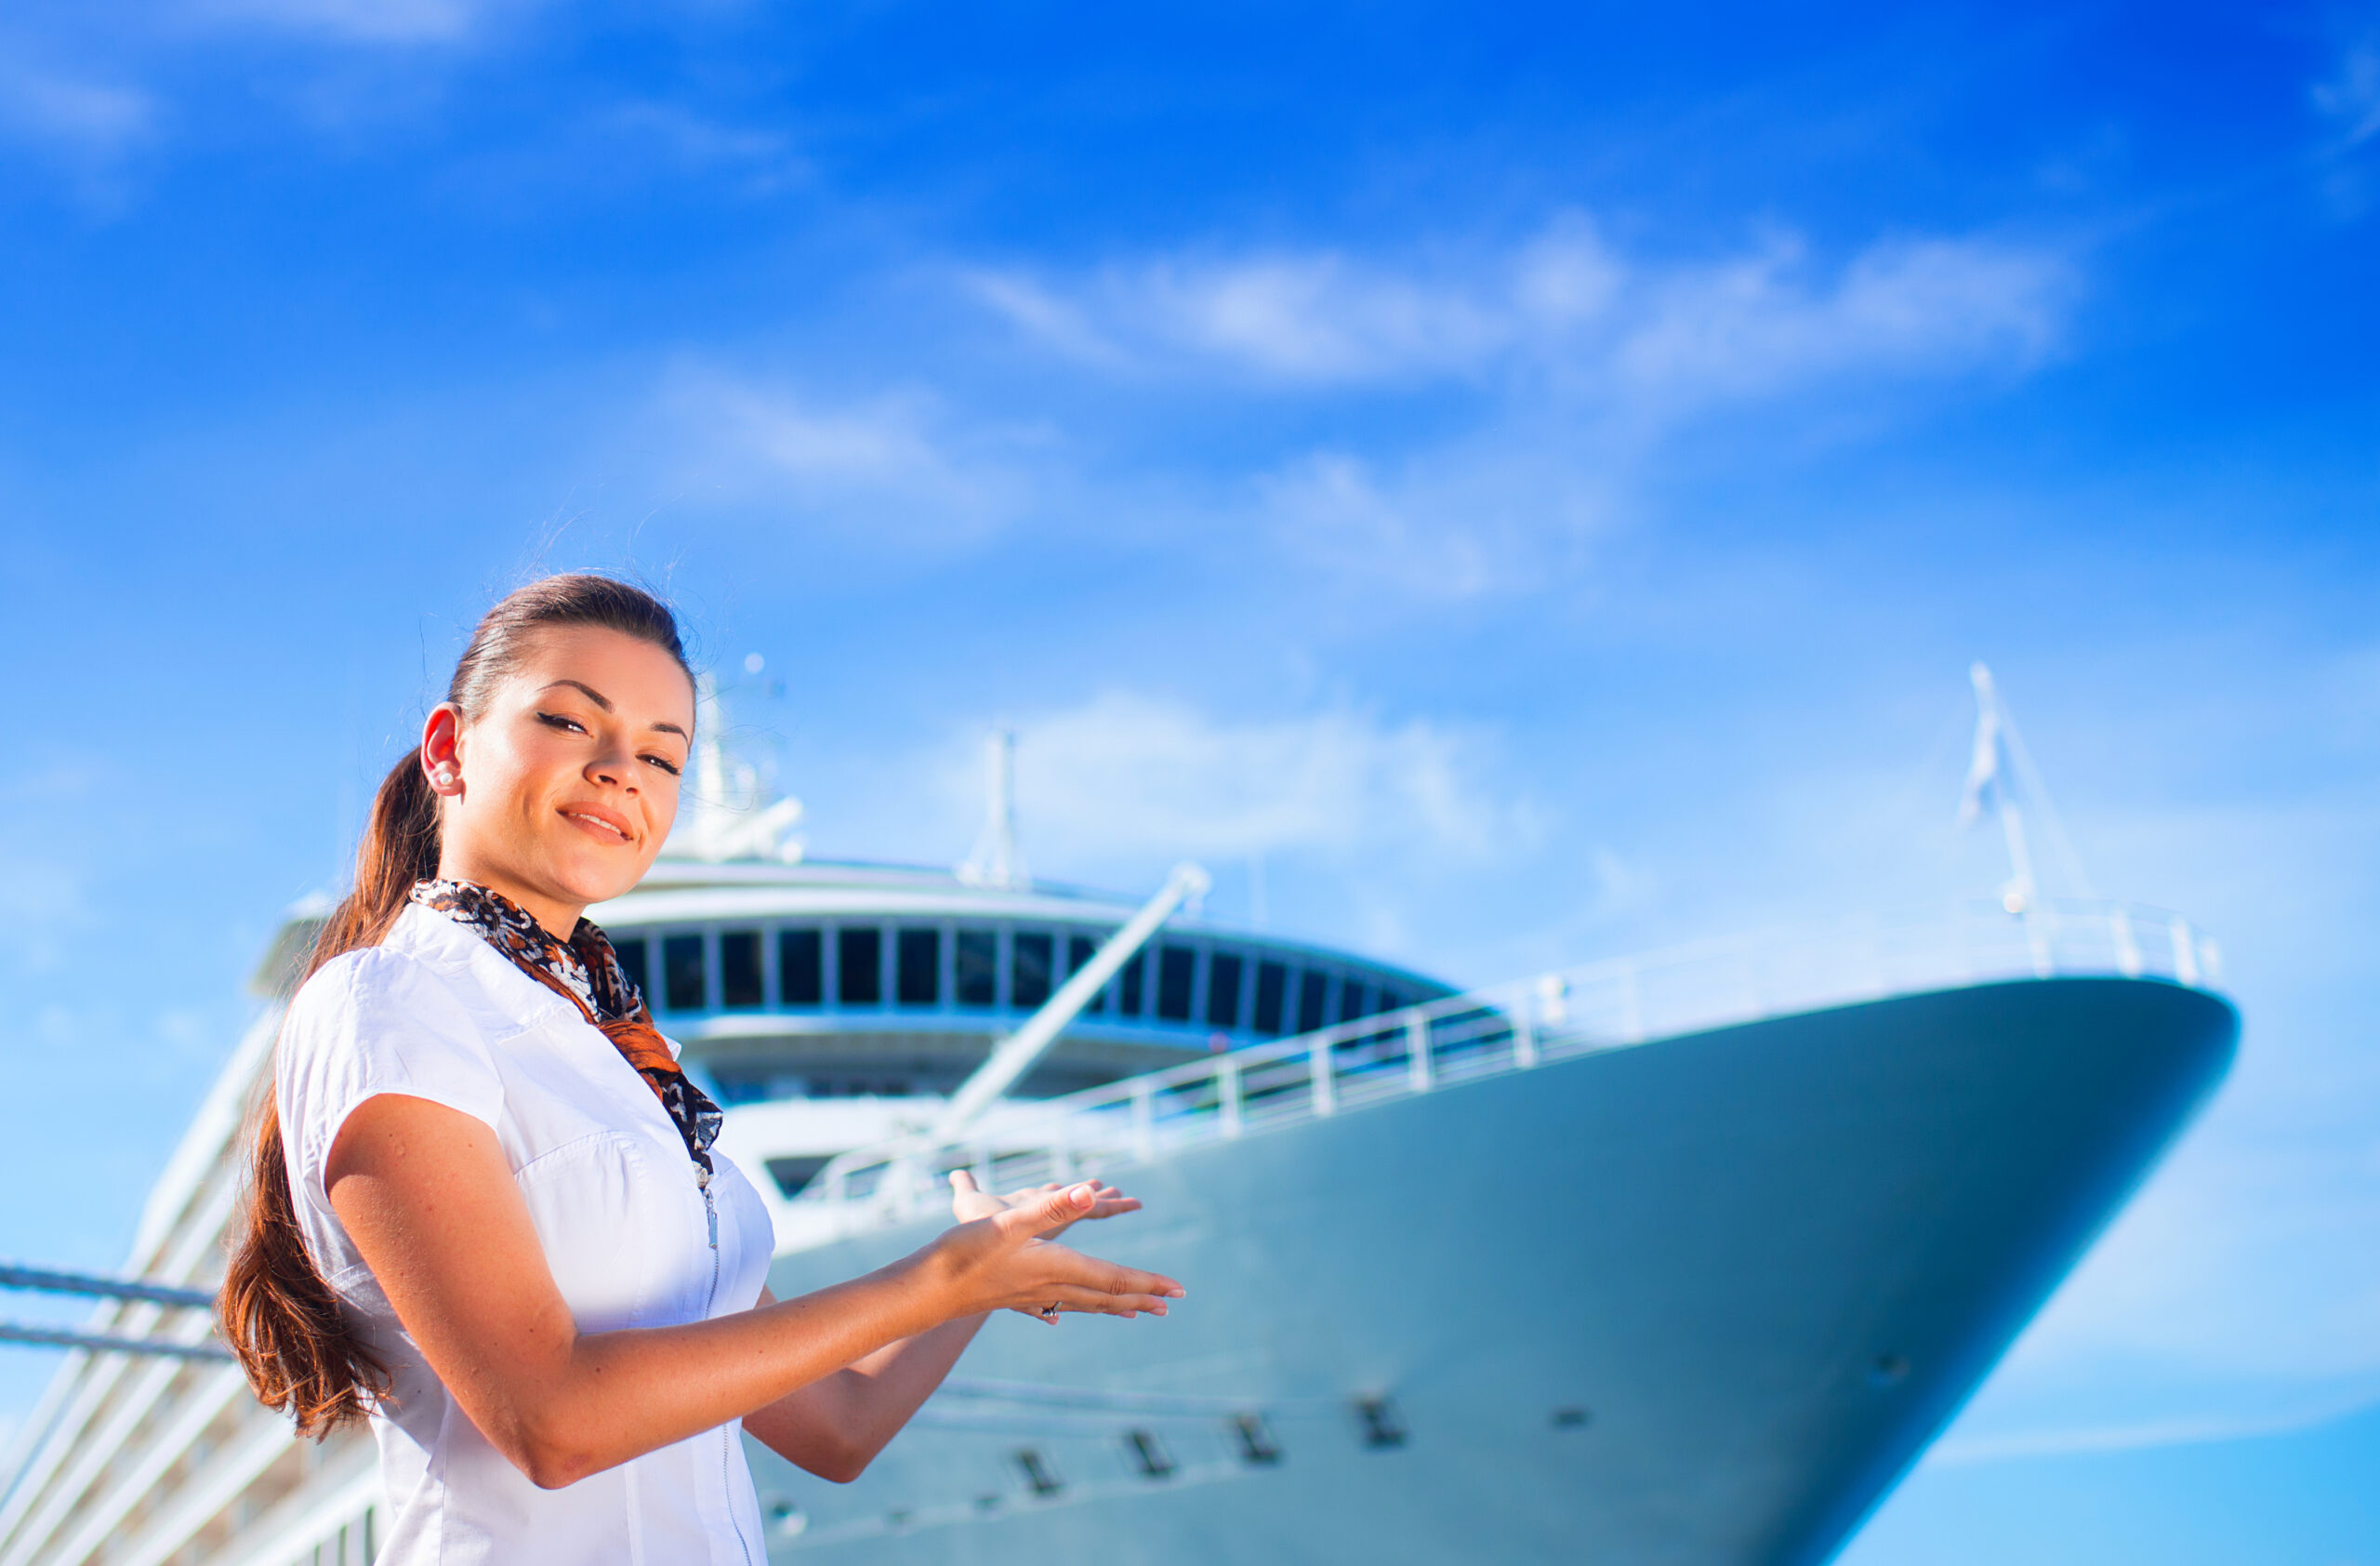 <p>Various roles on cruise ships include entertainment, stewards, and waiting on tables. These roles allow one to visit different countries while earning money; some cruise lines also offer accommodation for the staff’s extended family.</p>